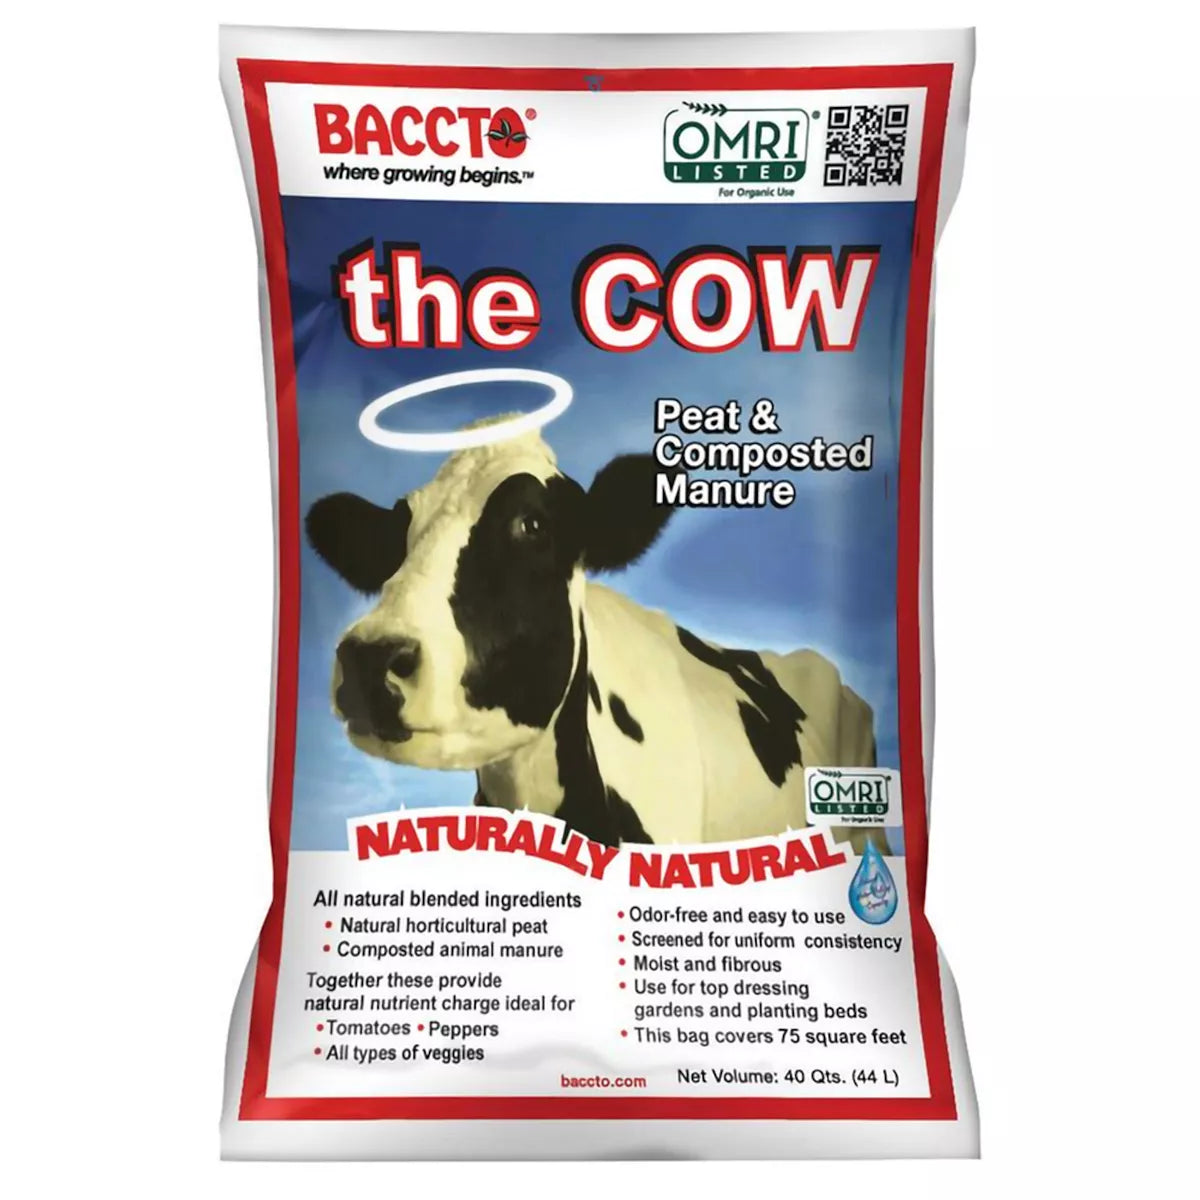 40qt Baccto "the COW" Peat & Composted Manure